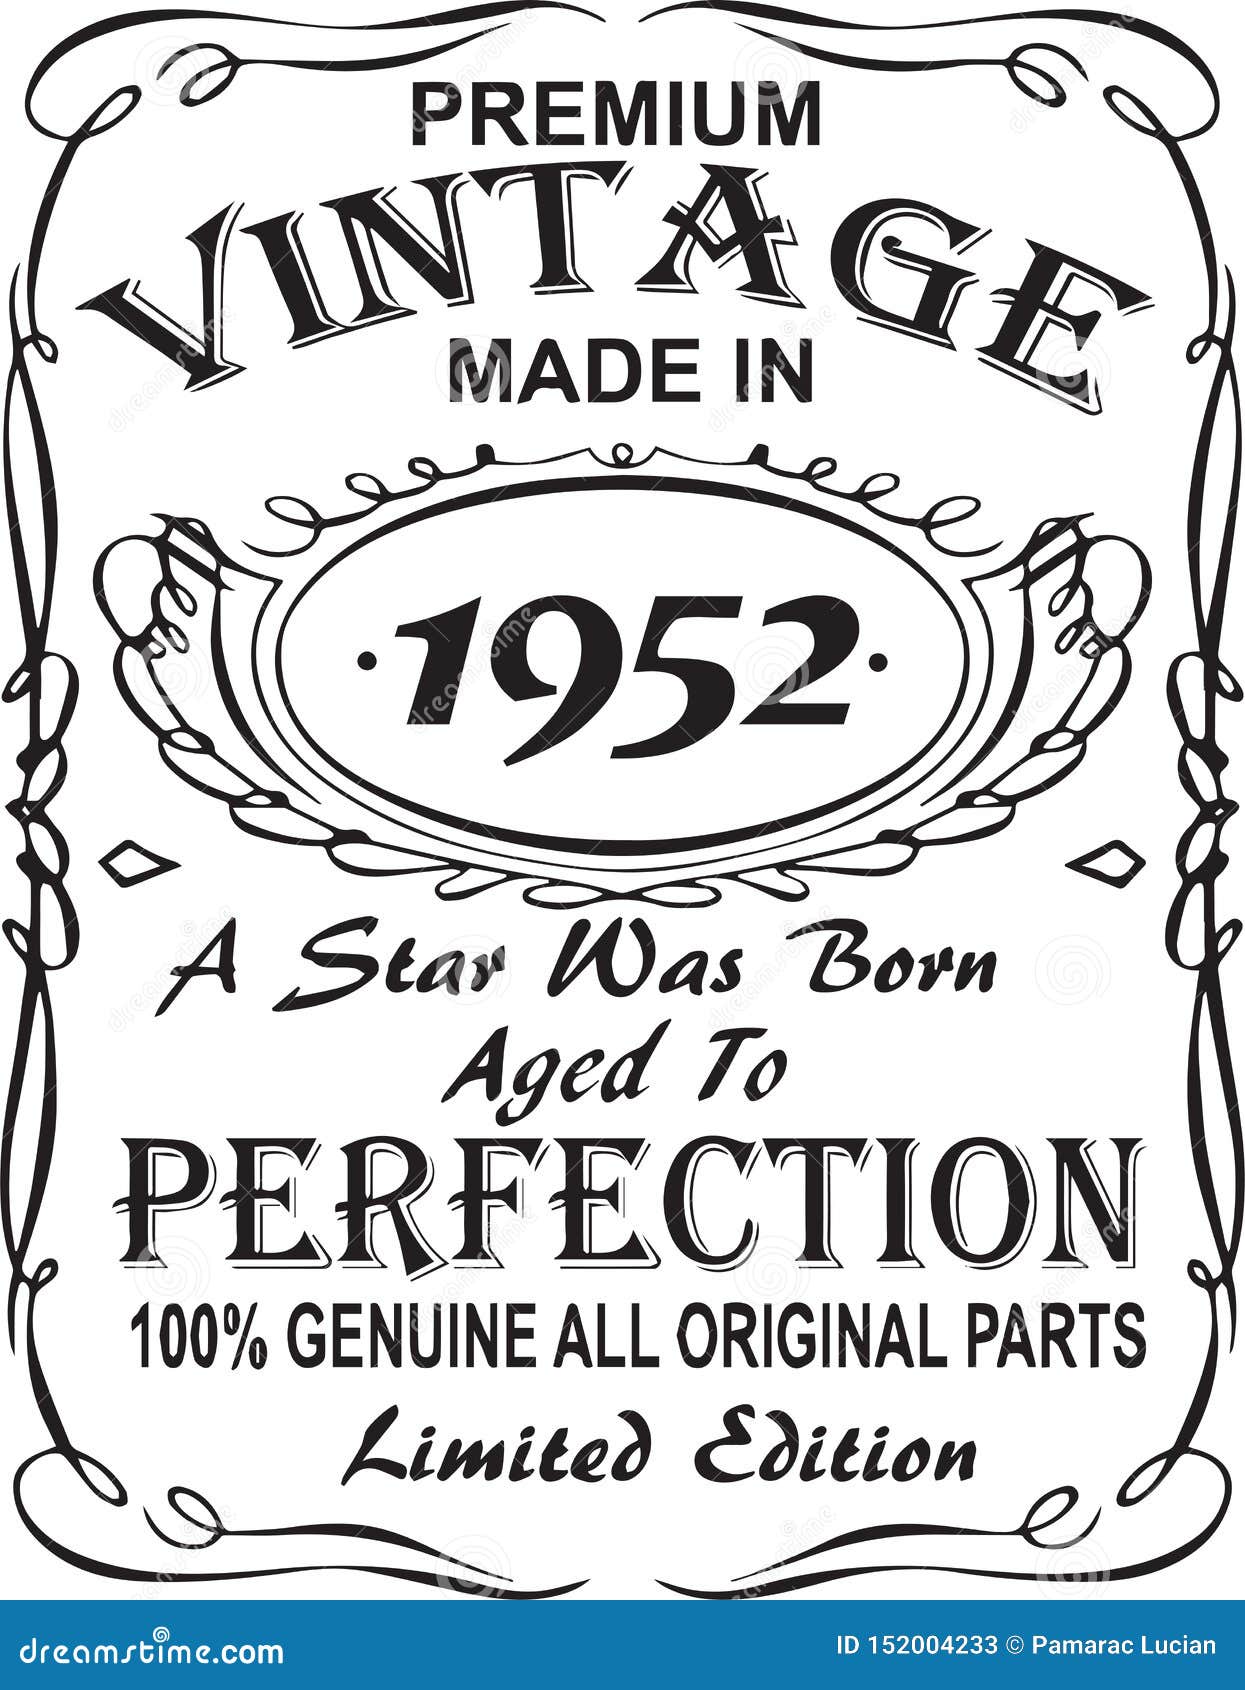 ial t-shirt print .premium vintage made in 1952 a star was born aged to perfection 100% genuine all original parts lim